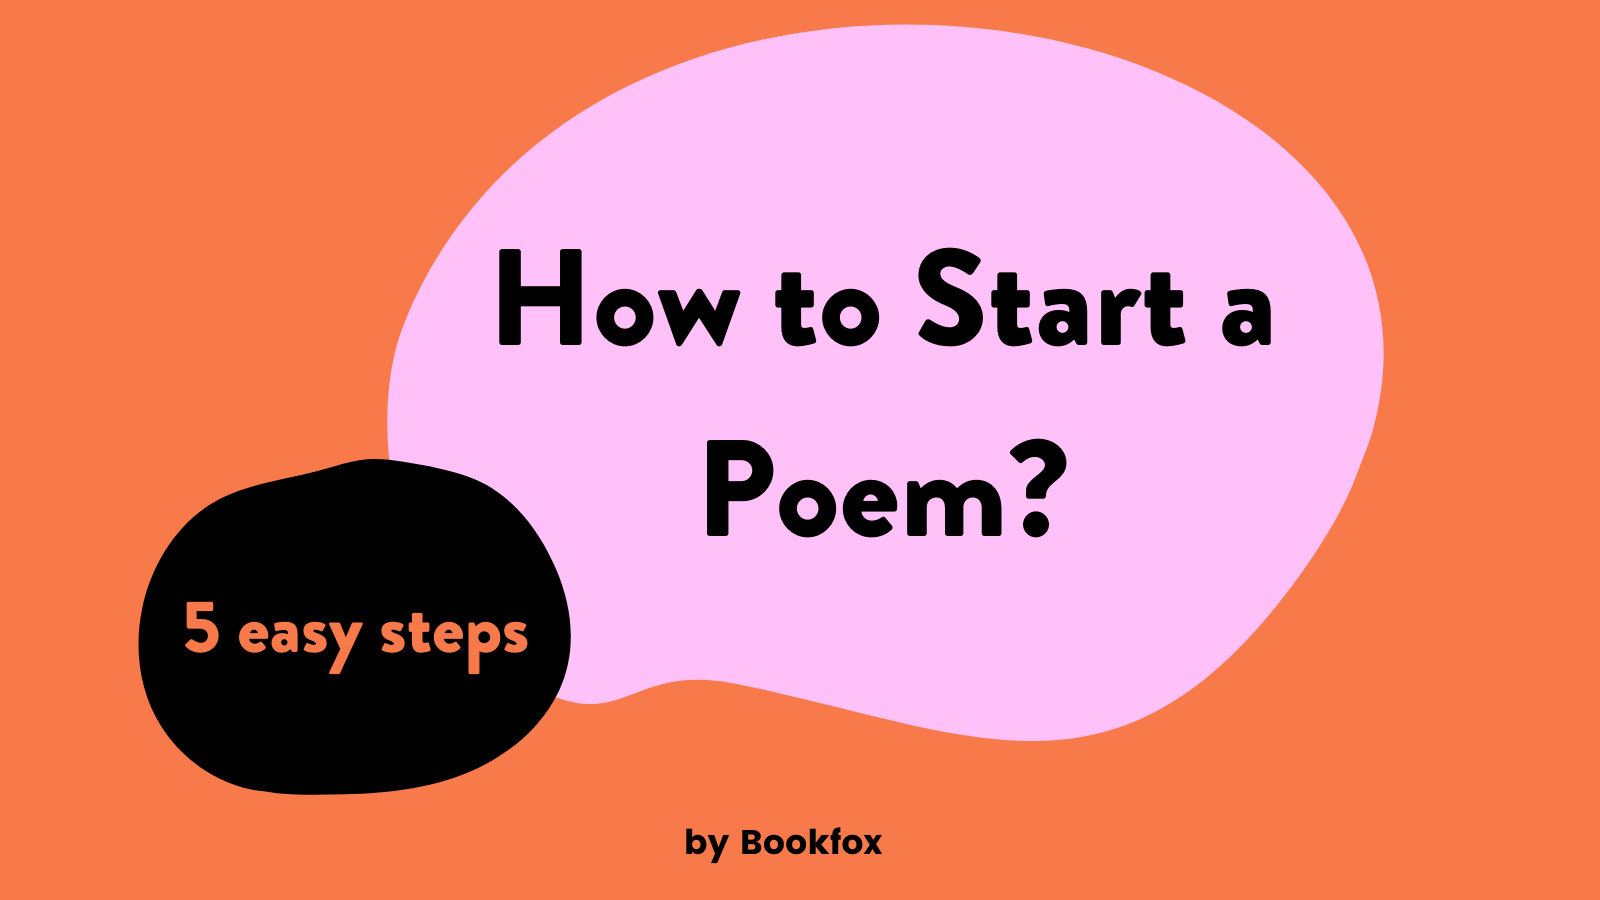 How to Start a Poem? 5 Easy Steps